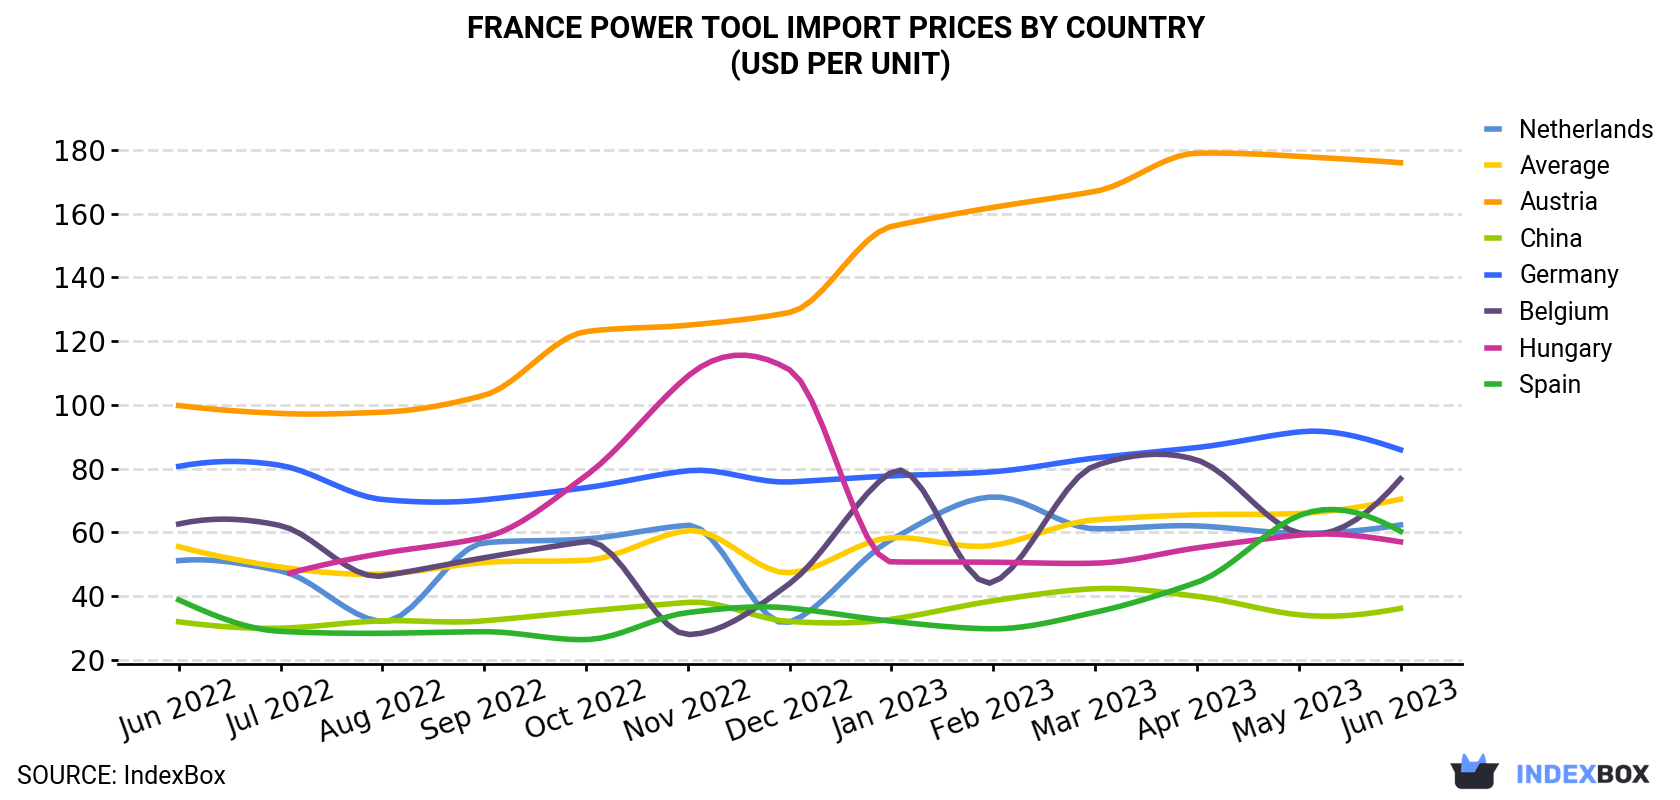 France Power Tool Import Prices By Country (USD Per Unit)